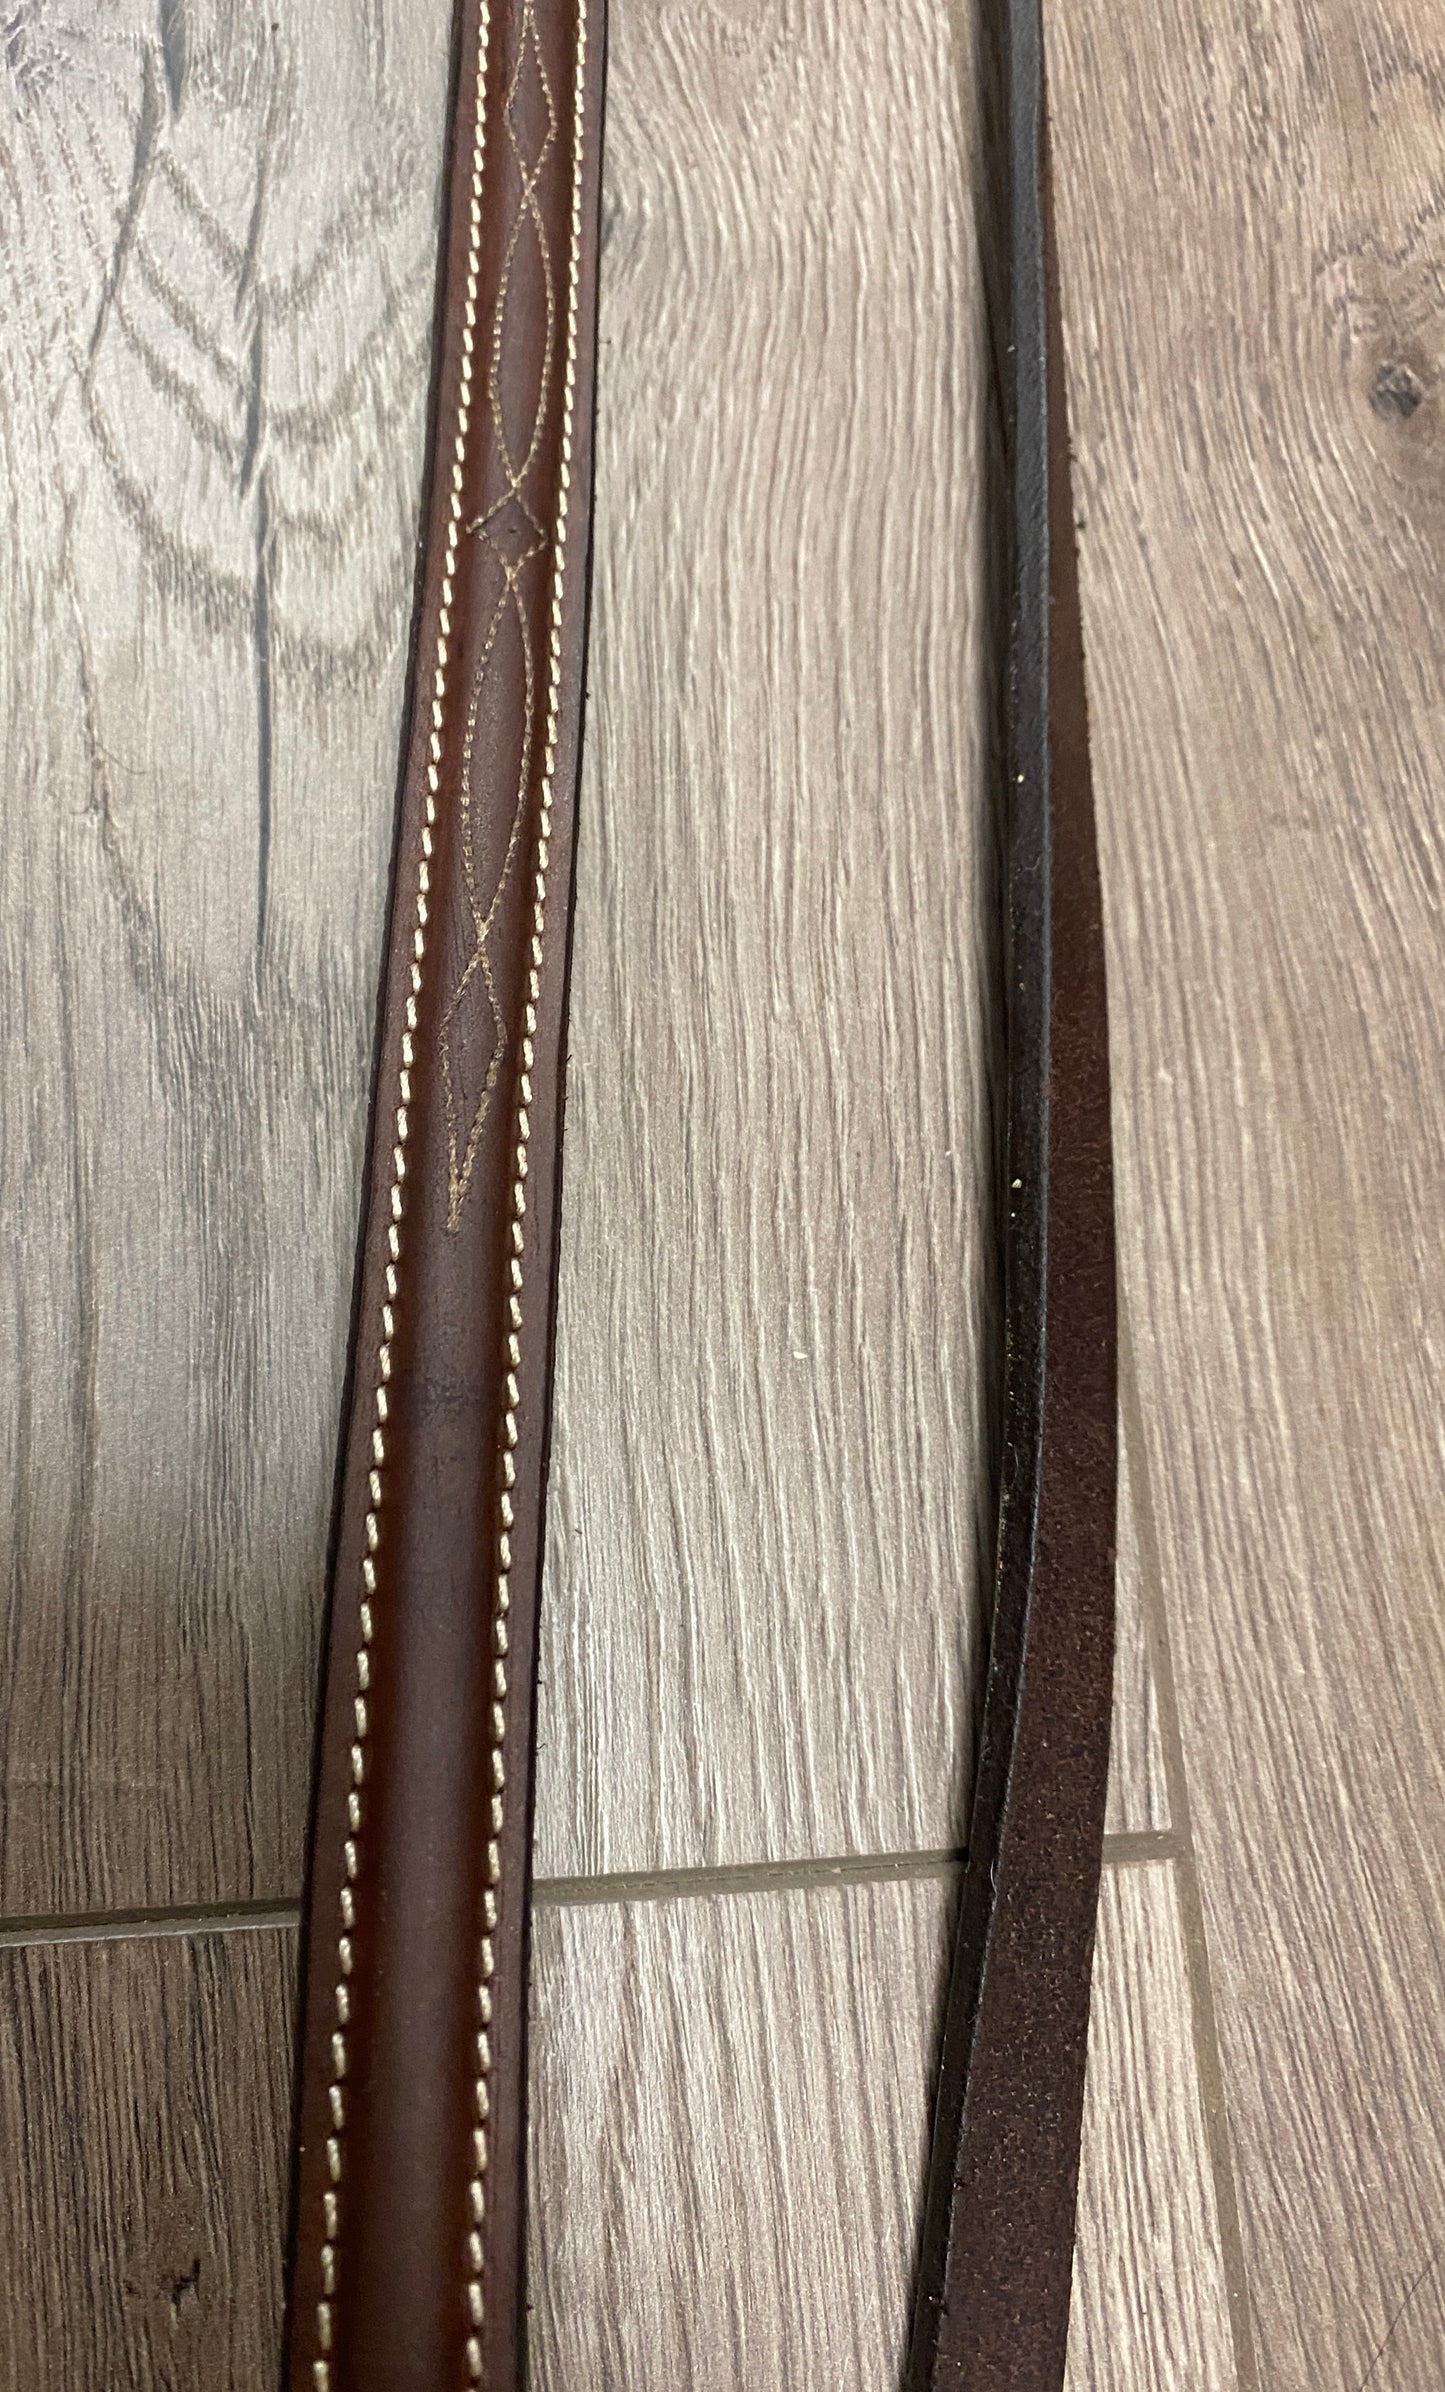 Full/Horse Beval Raised Fancy Stitch Standing Martingale